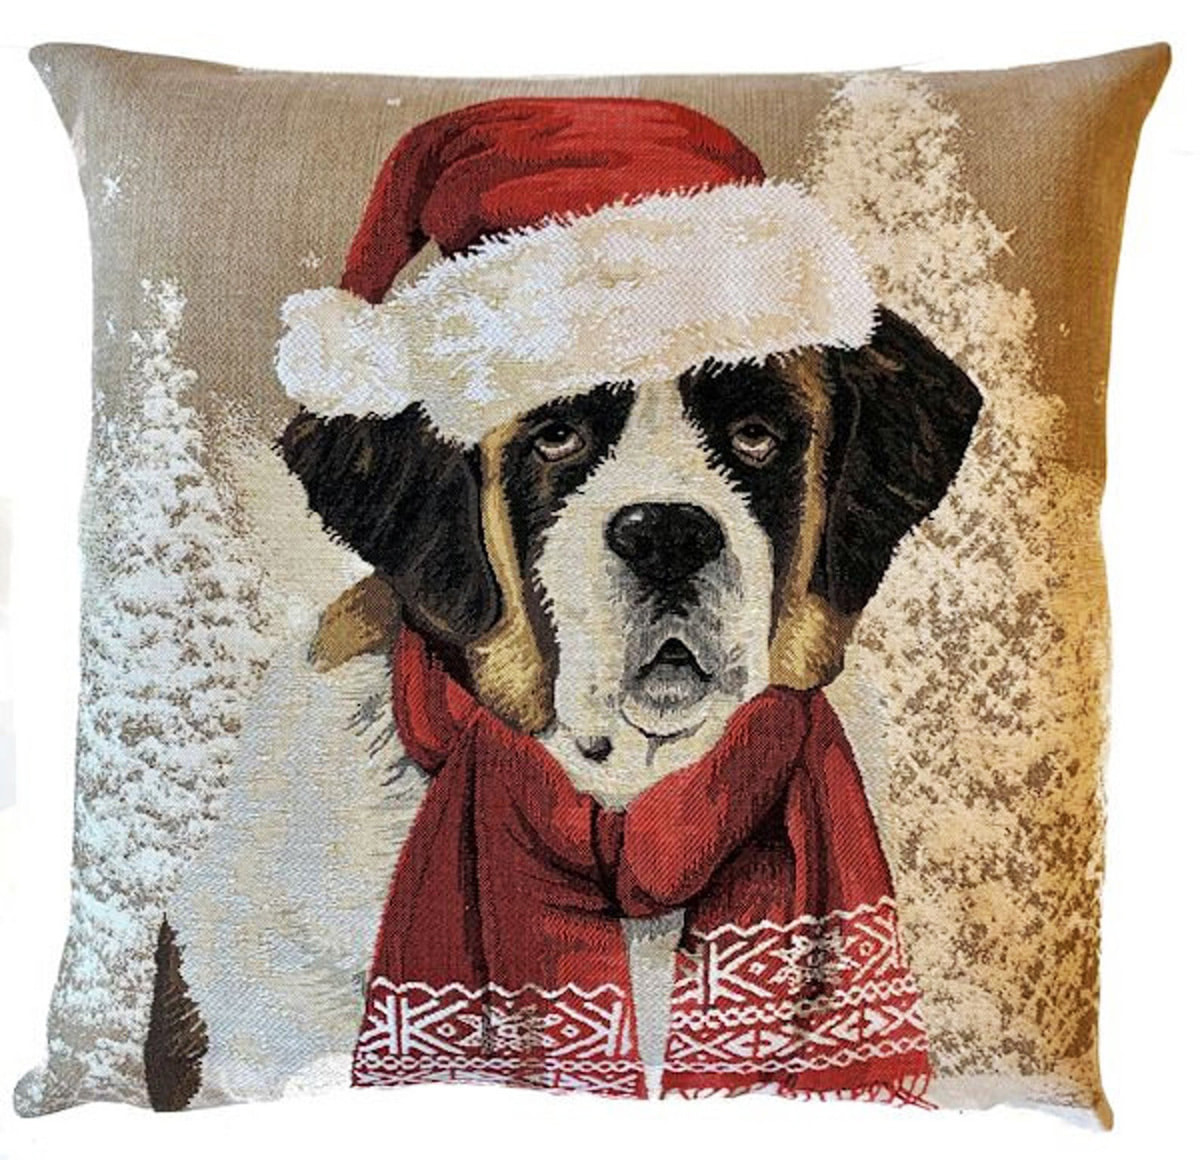 Father Christmas Cushion Cover Square Scatter Case Xmas Santa Claus Cute Puppy